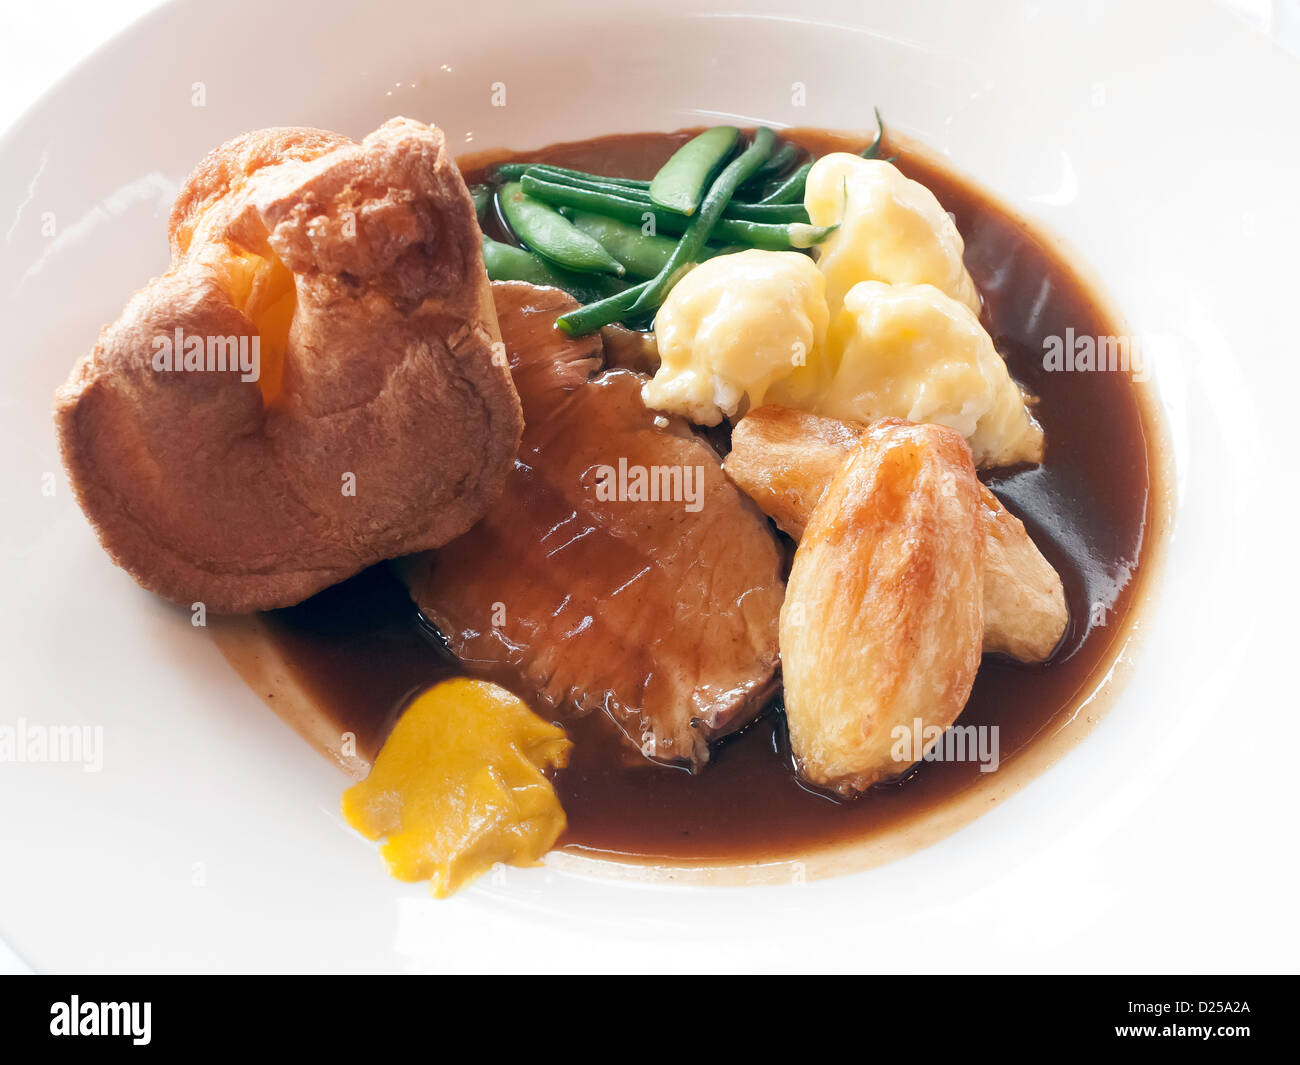 Sunday Lunch English Country Hotel main course Roast Beef Yorkshire pudding vegetables gravy and Mustard Stock Photo